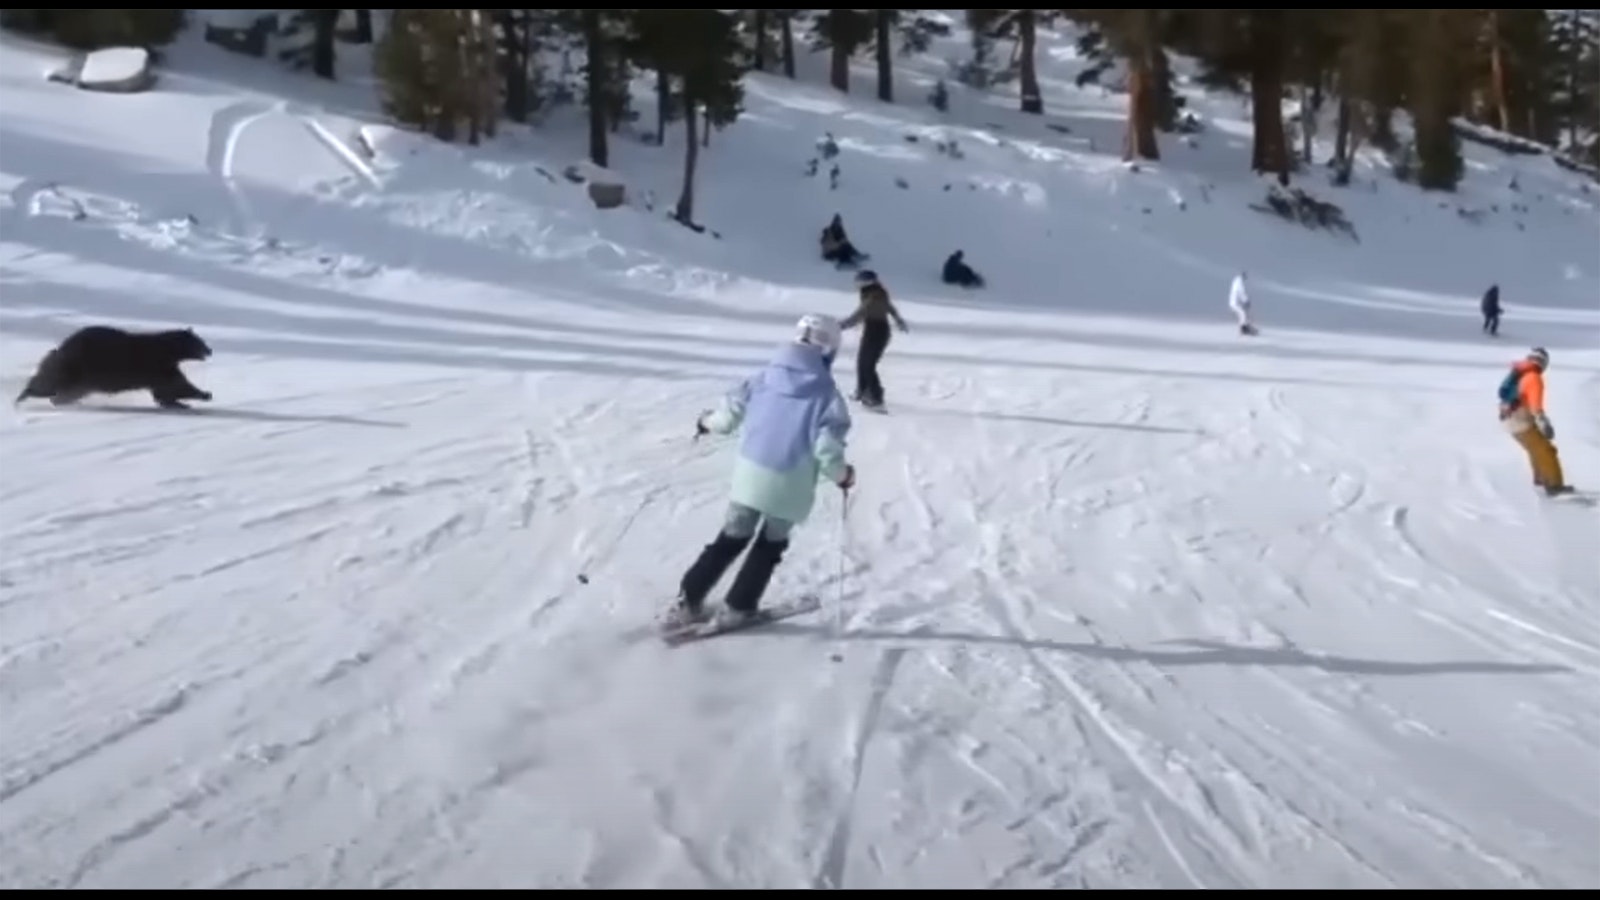 A skier on a California slope was taking video when this bear charged across, missing skiers by inches before barreling down the other side of the slope.